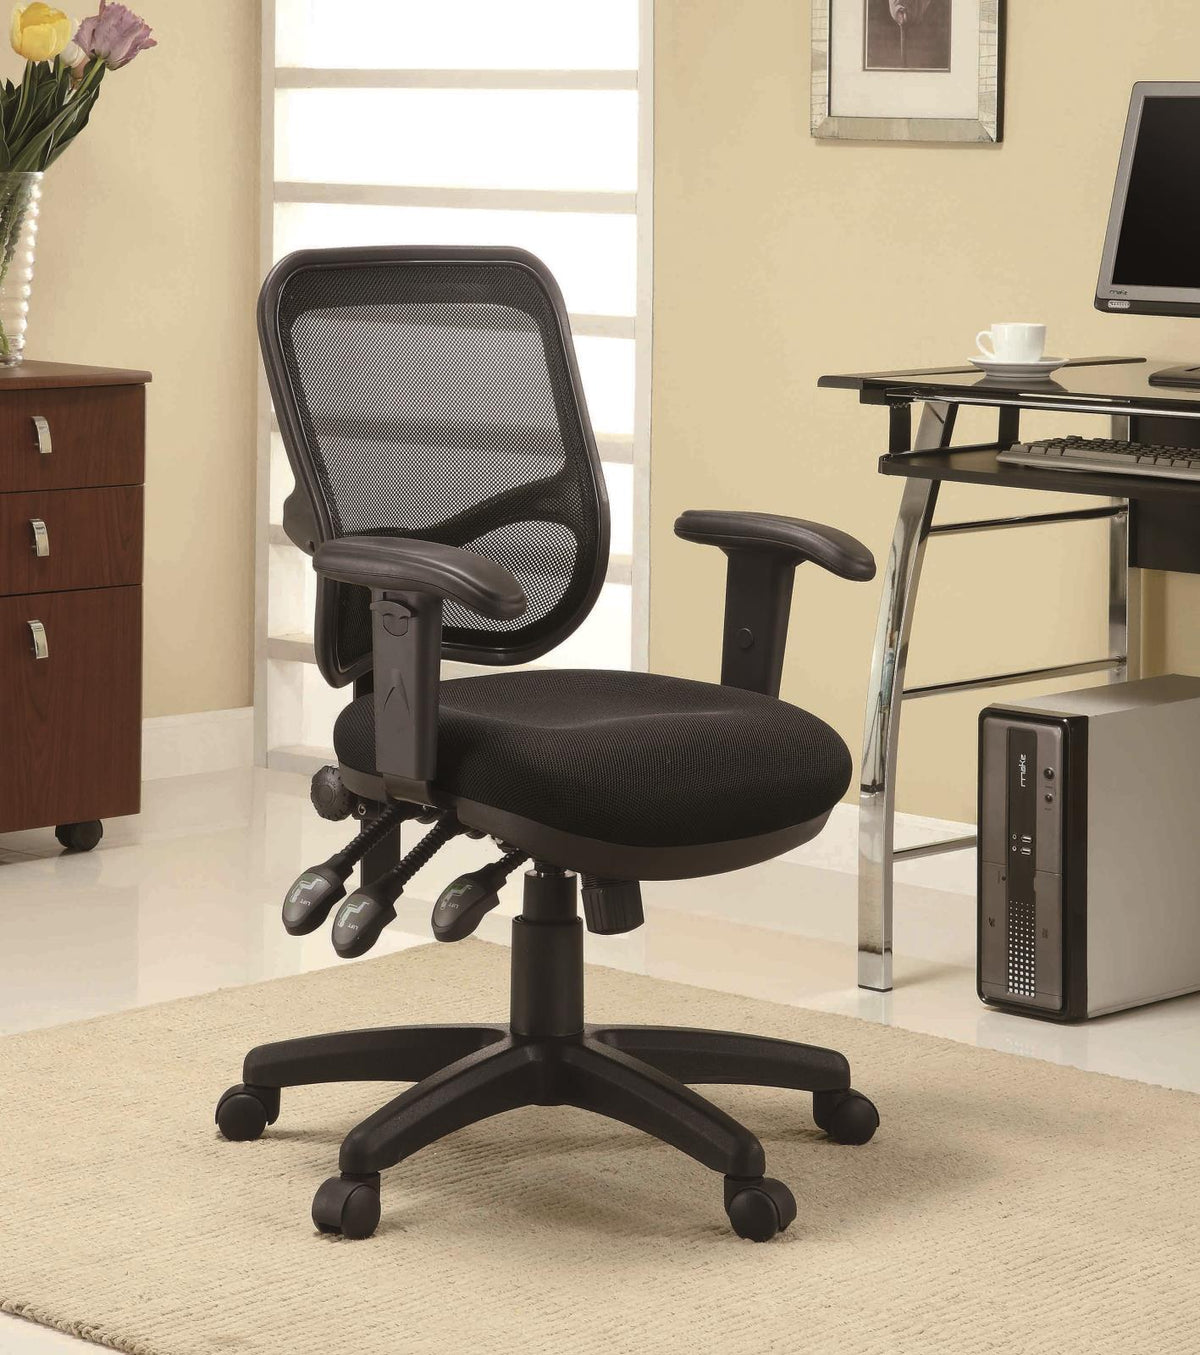 Rollo Adjustable Height Office Chair Black Rollo Adjustable Height Office Chair Black Half Price Furniture